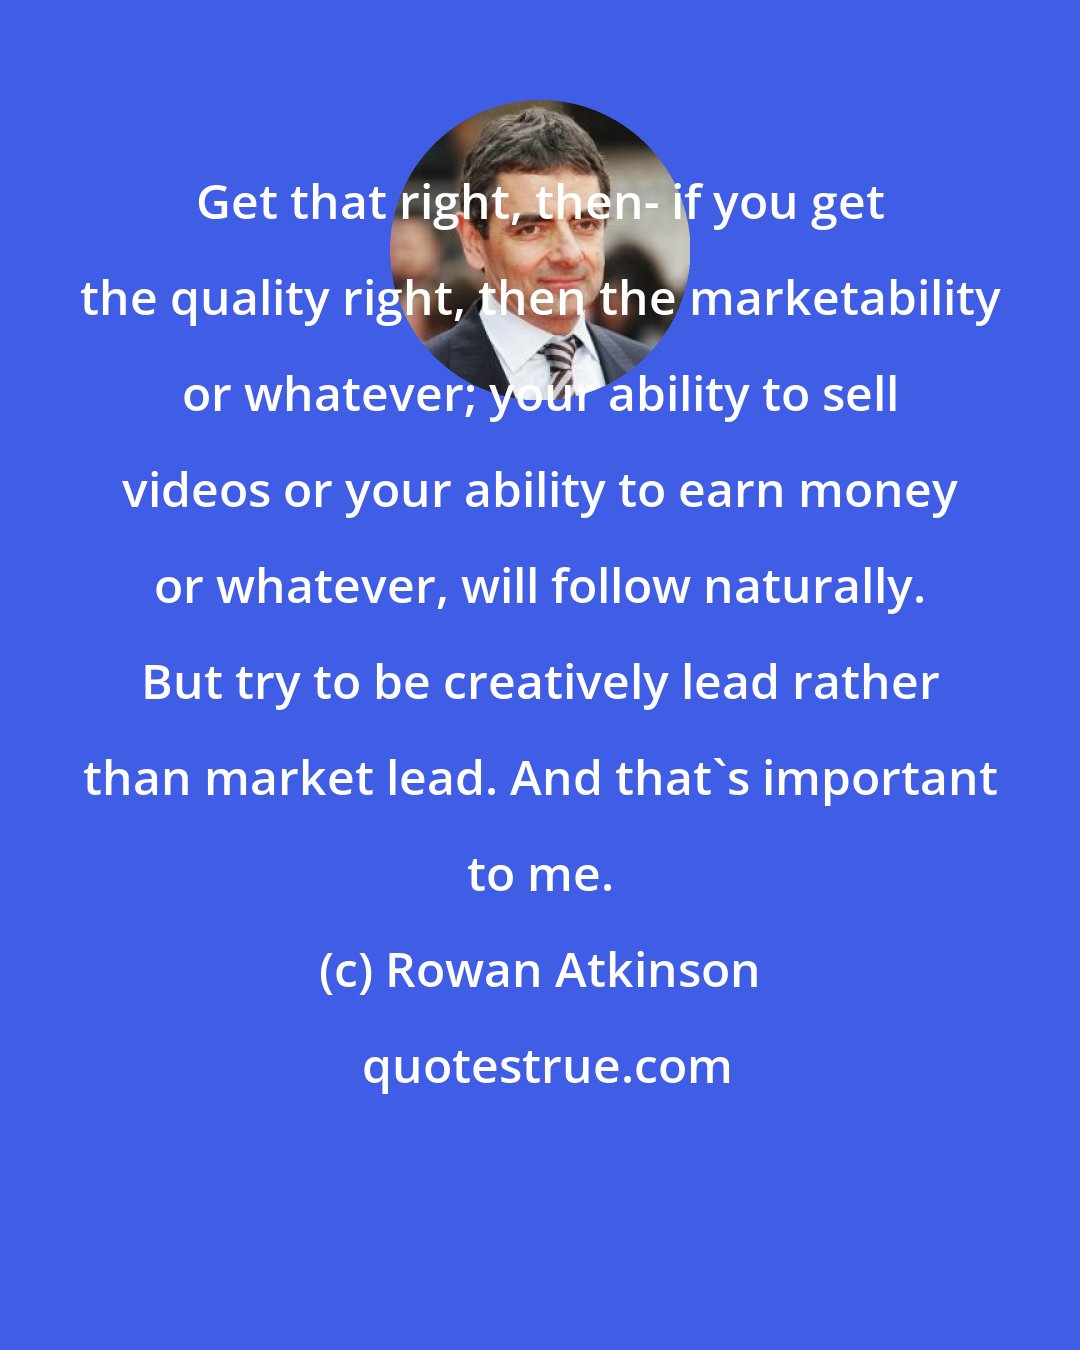 Rowan Atkinson: Get that right, then- if you get the quality right, then the marketability or whatever; your ability to sell videos or your ability to earn money or whatever, will follow naturally. But try to be creatively lead rather than market lead. And that's important to me.